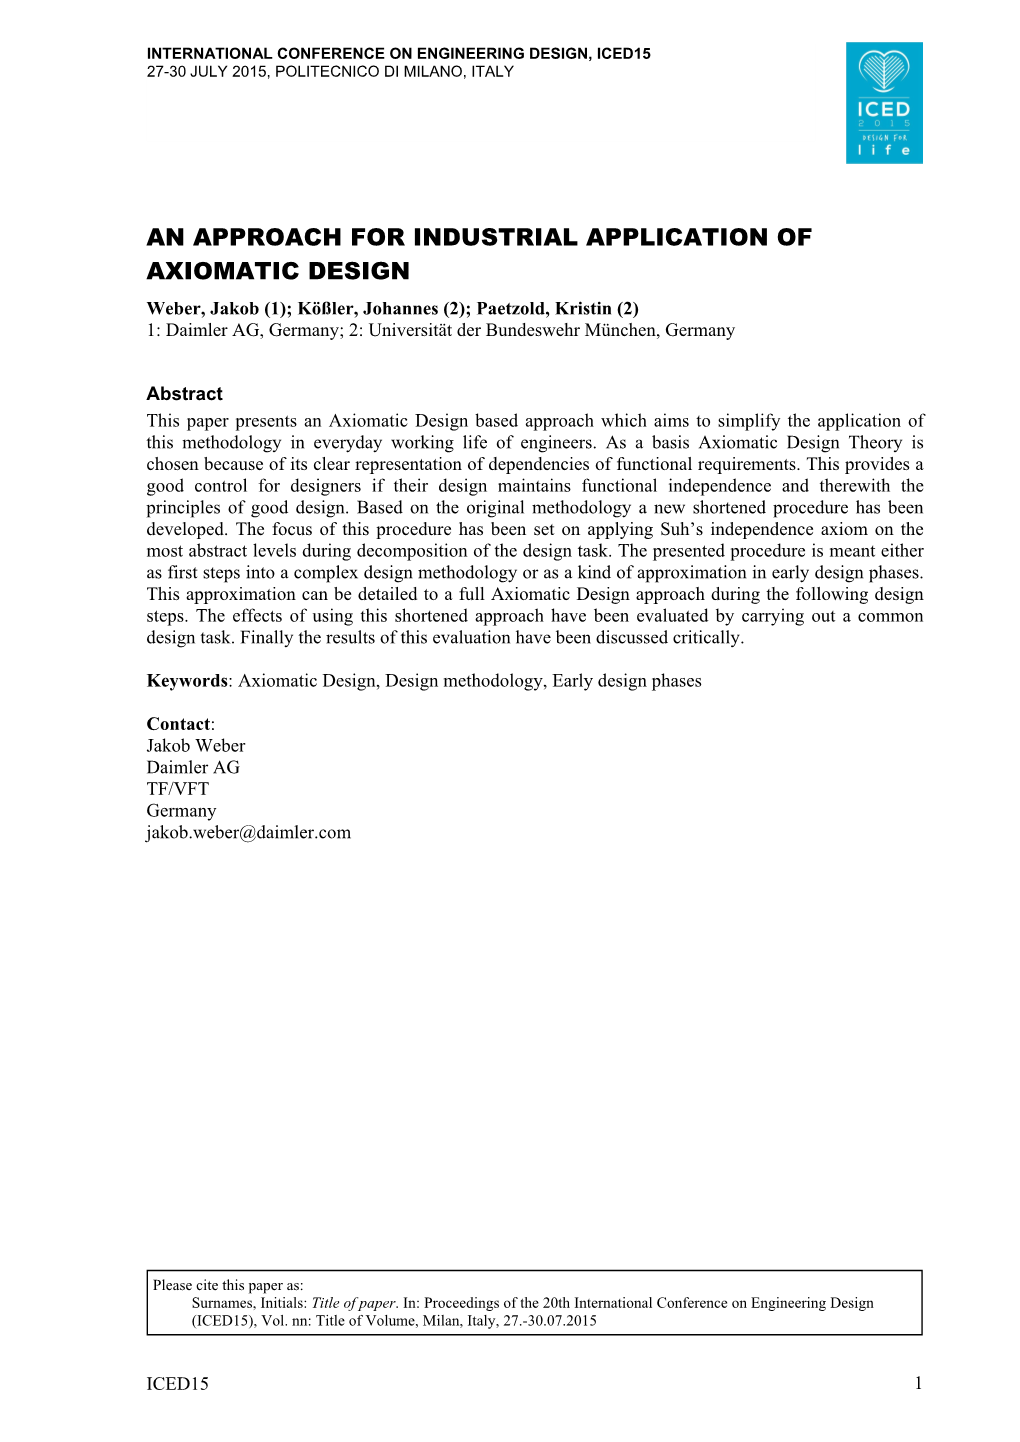 An Approach for Industrial Application of Axiomatic